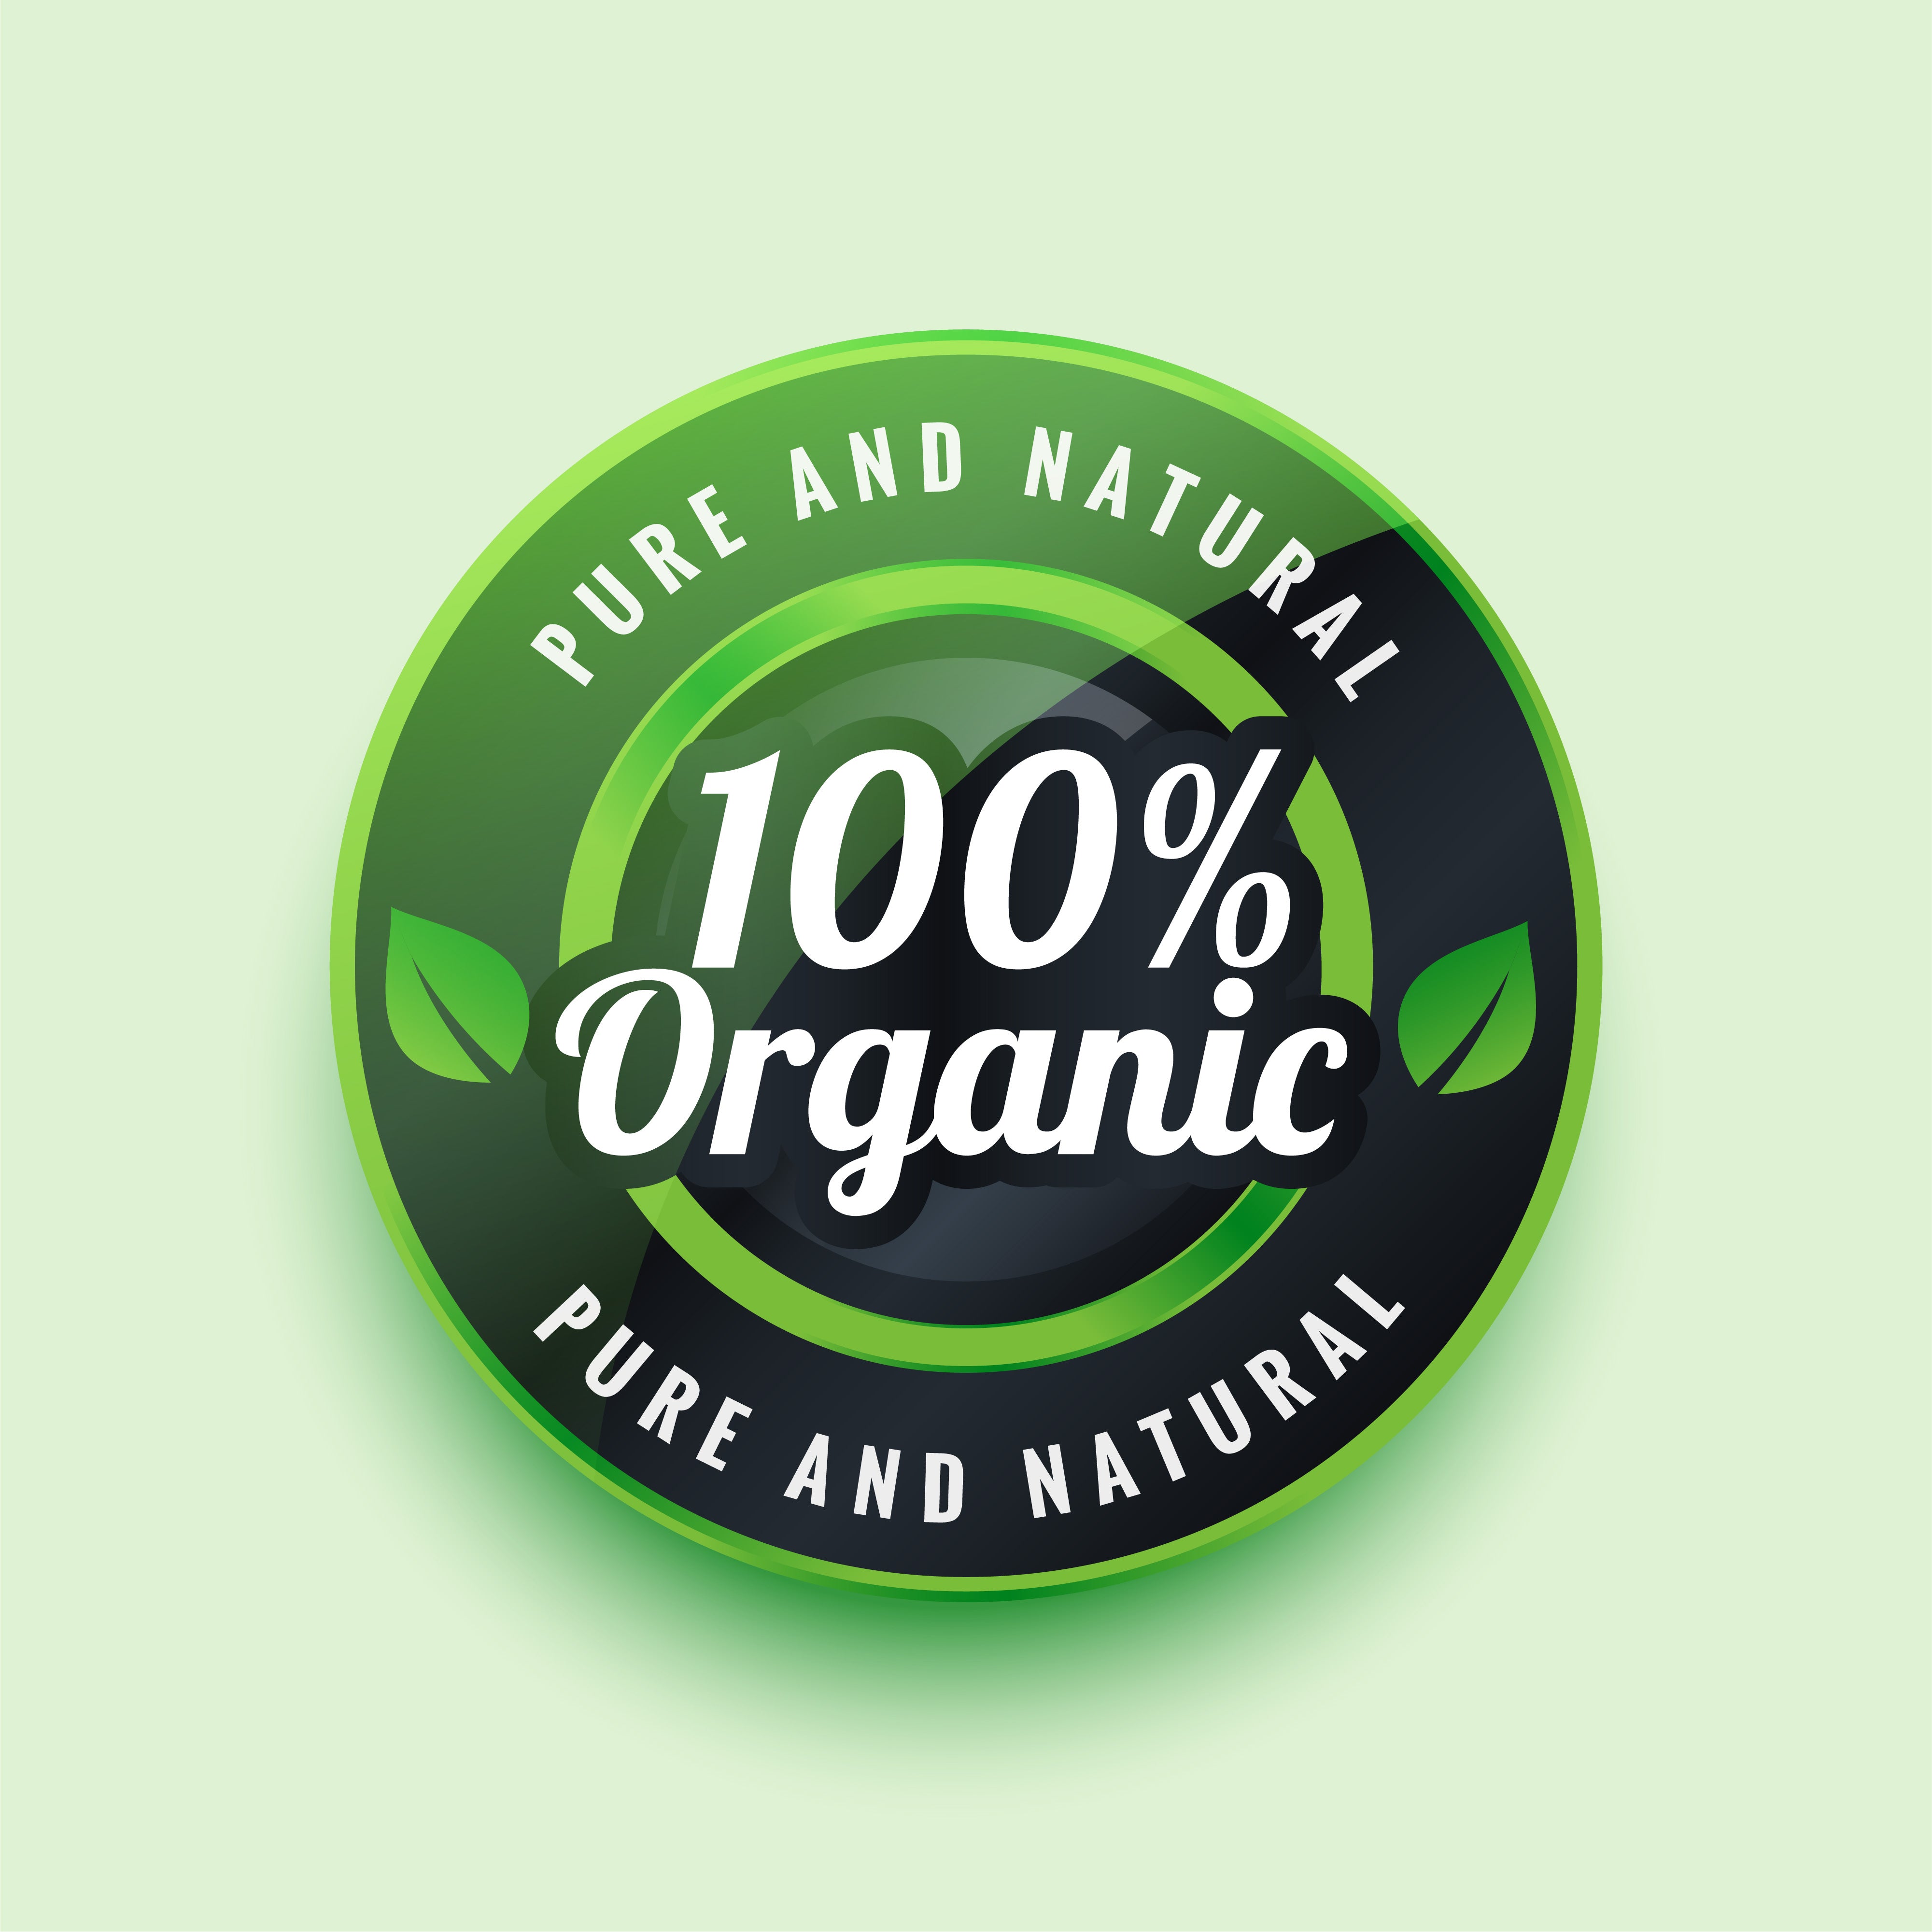 Why Buy Organic Food Products?